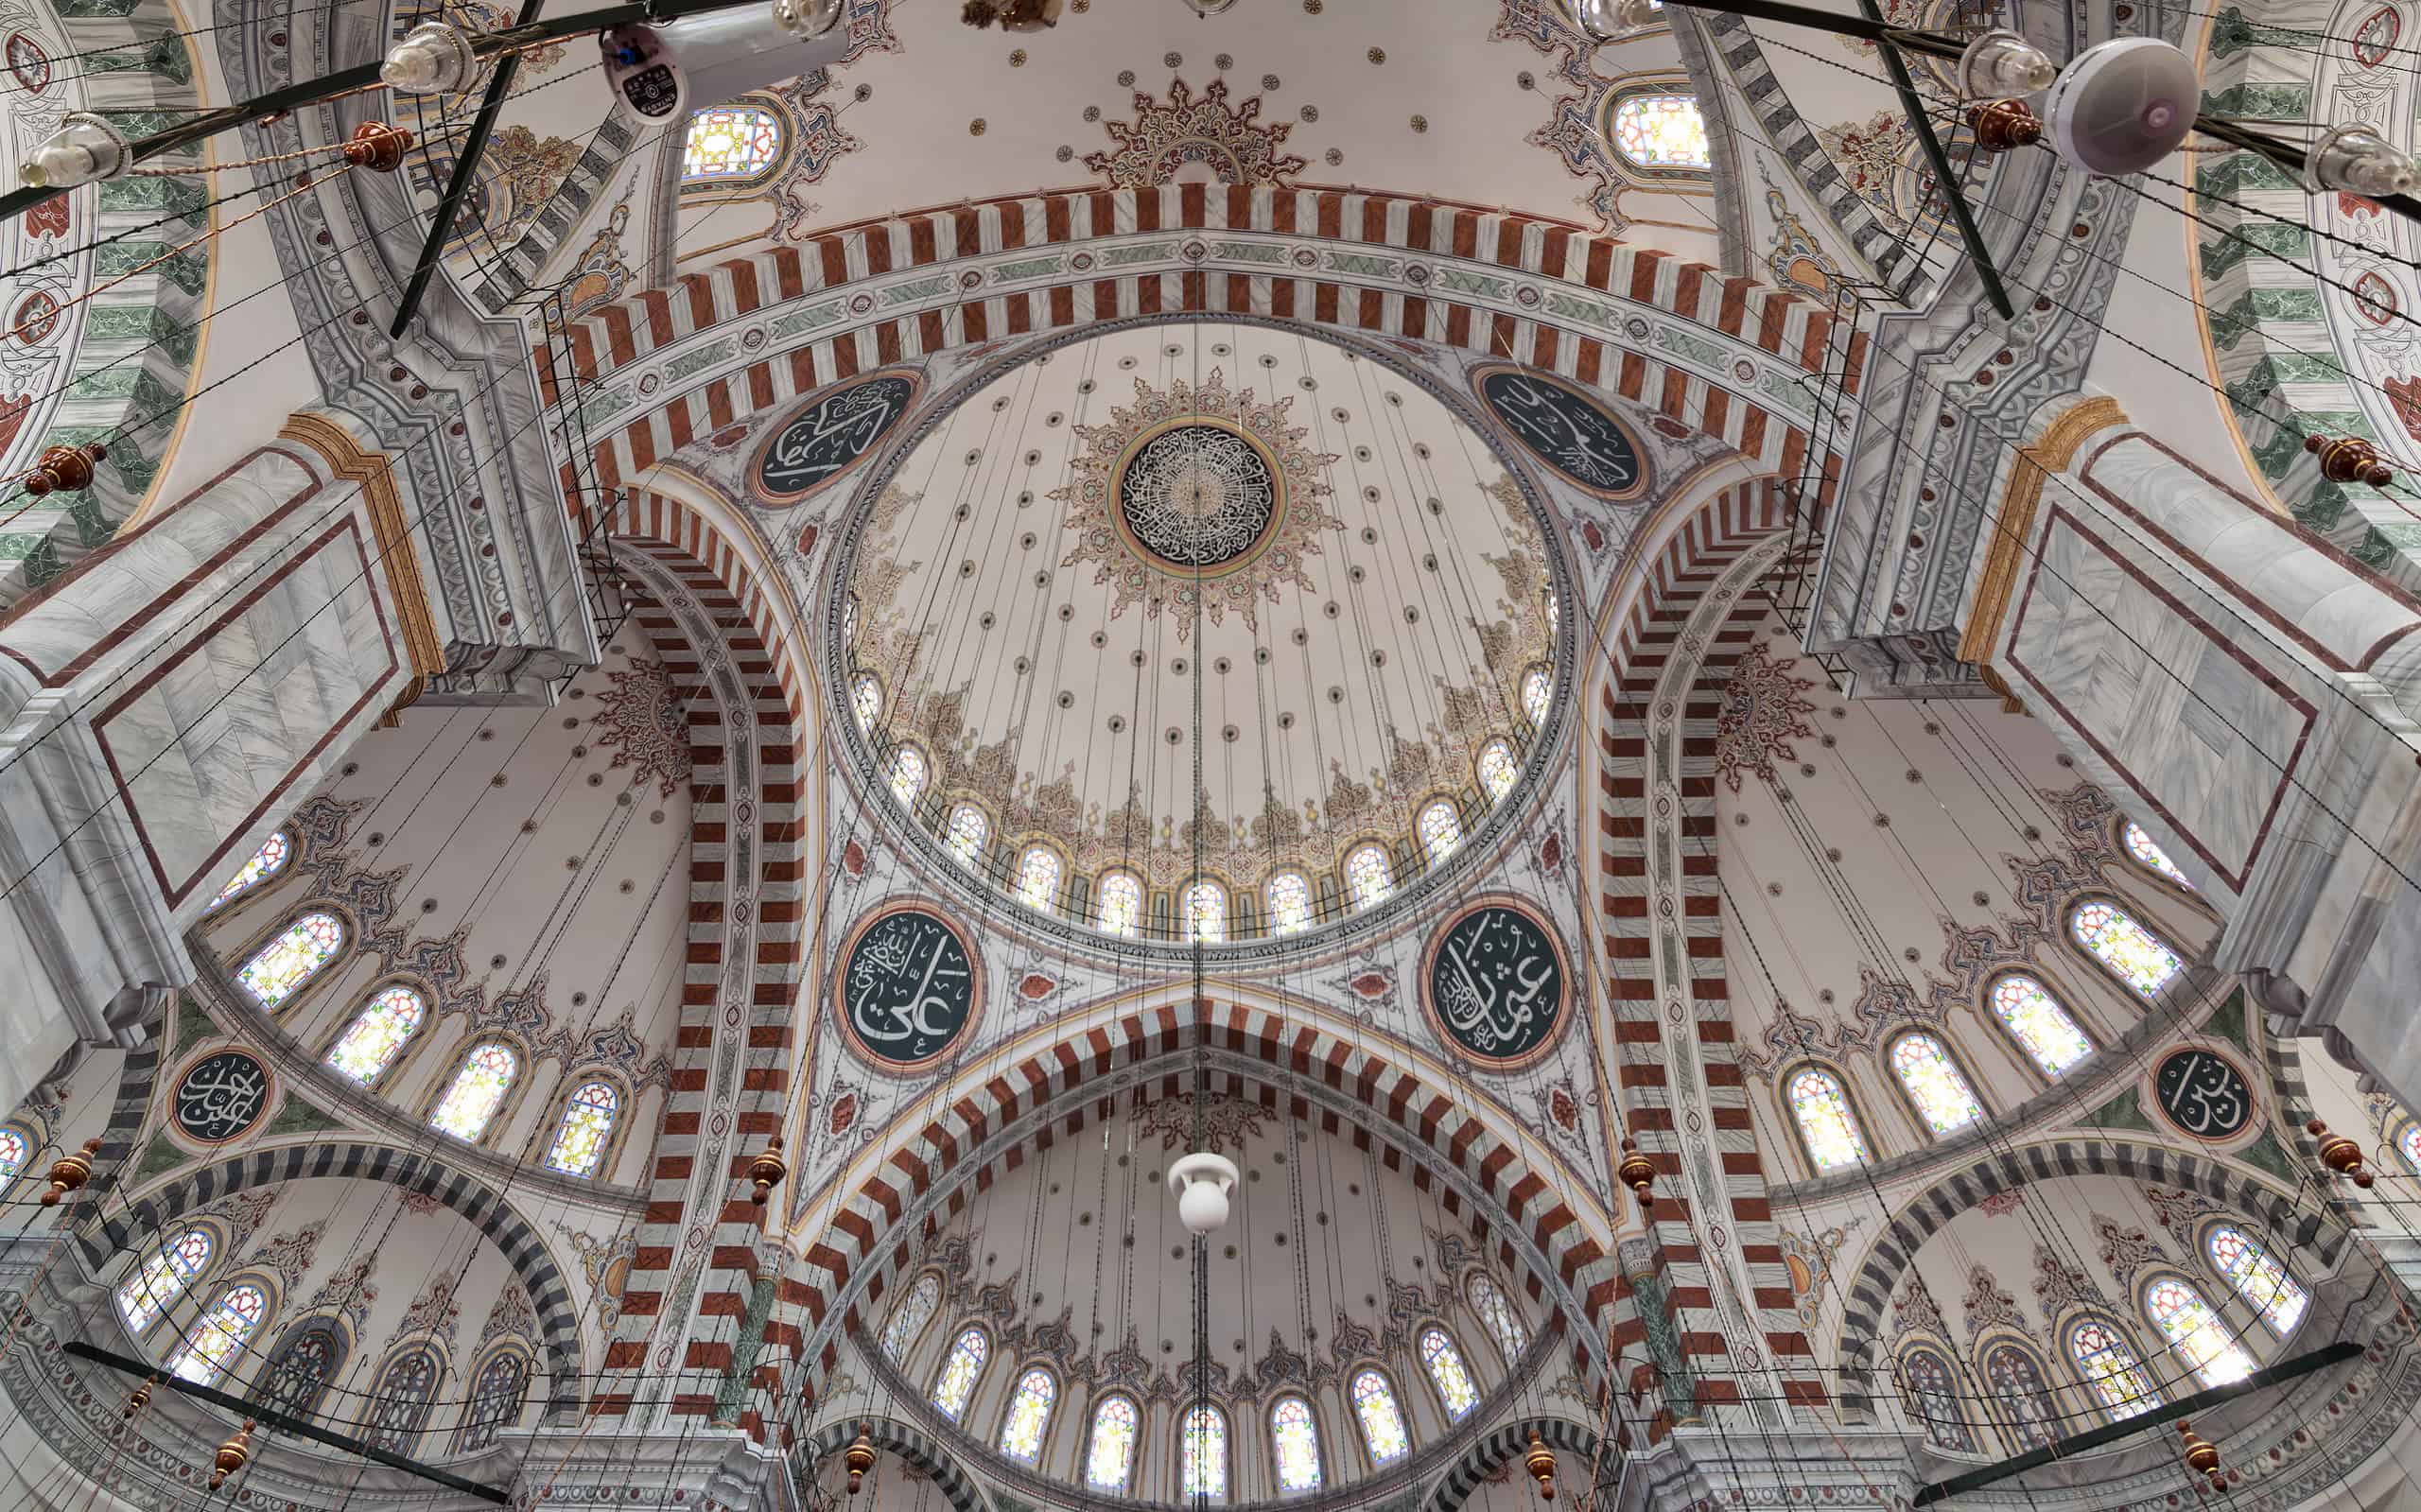 Ceiling of Ottoman Fatih Mosque in Istanbul, Turkey, made up of a series of decorated domes based on Islamic art